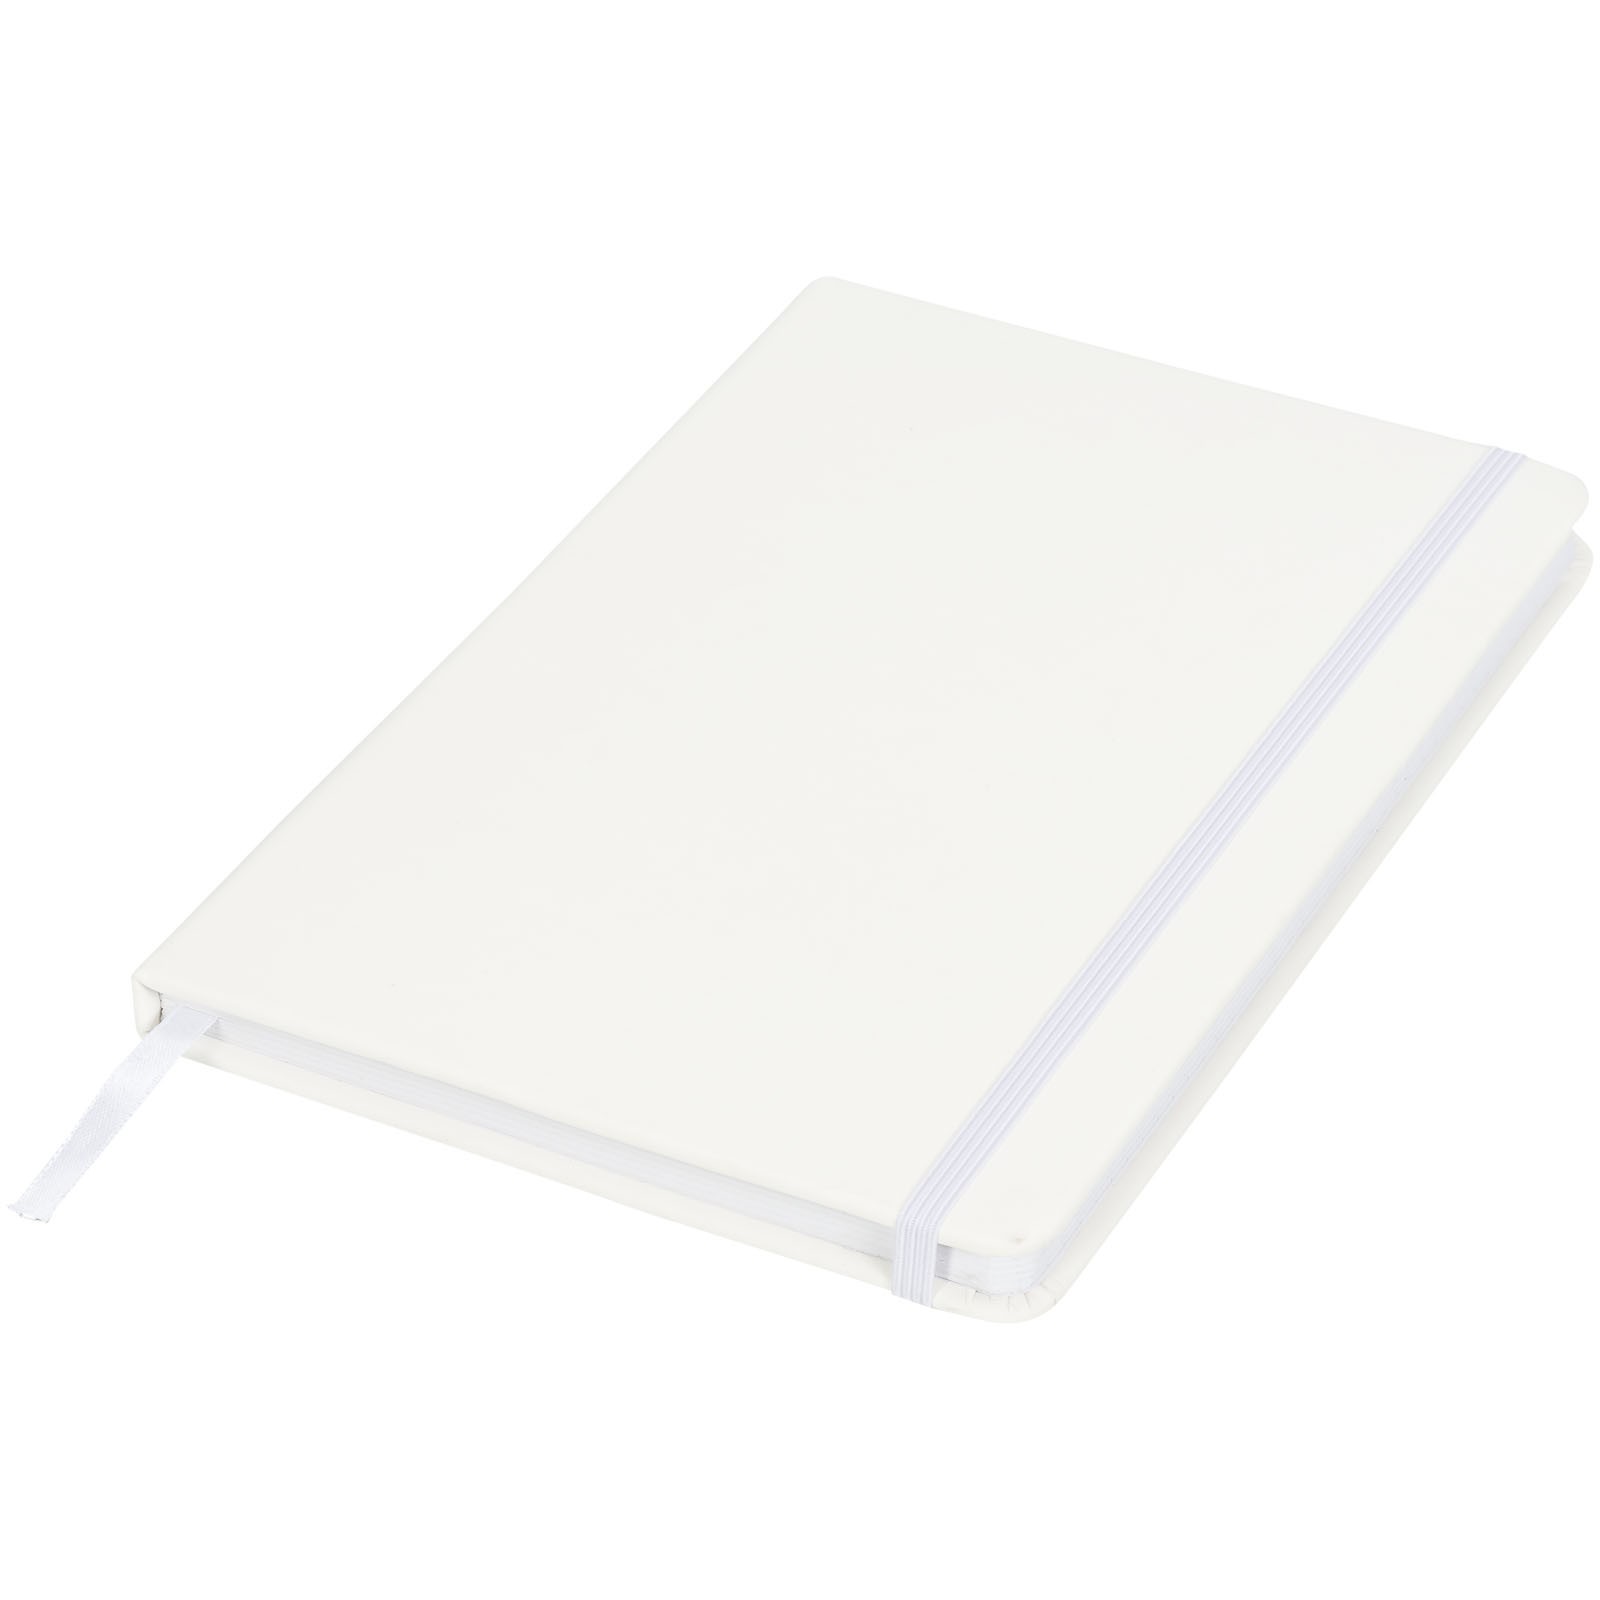 Spectrum A5 notebook with dotted pages - White